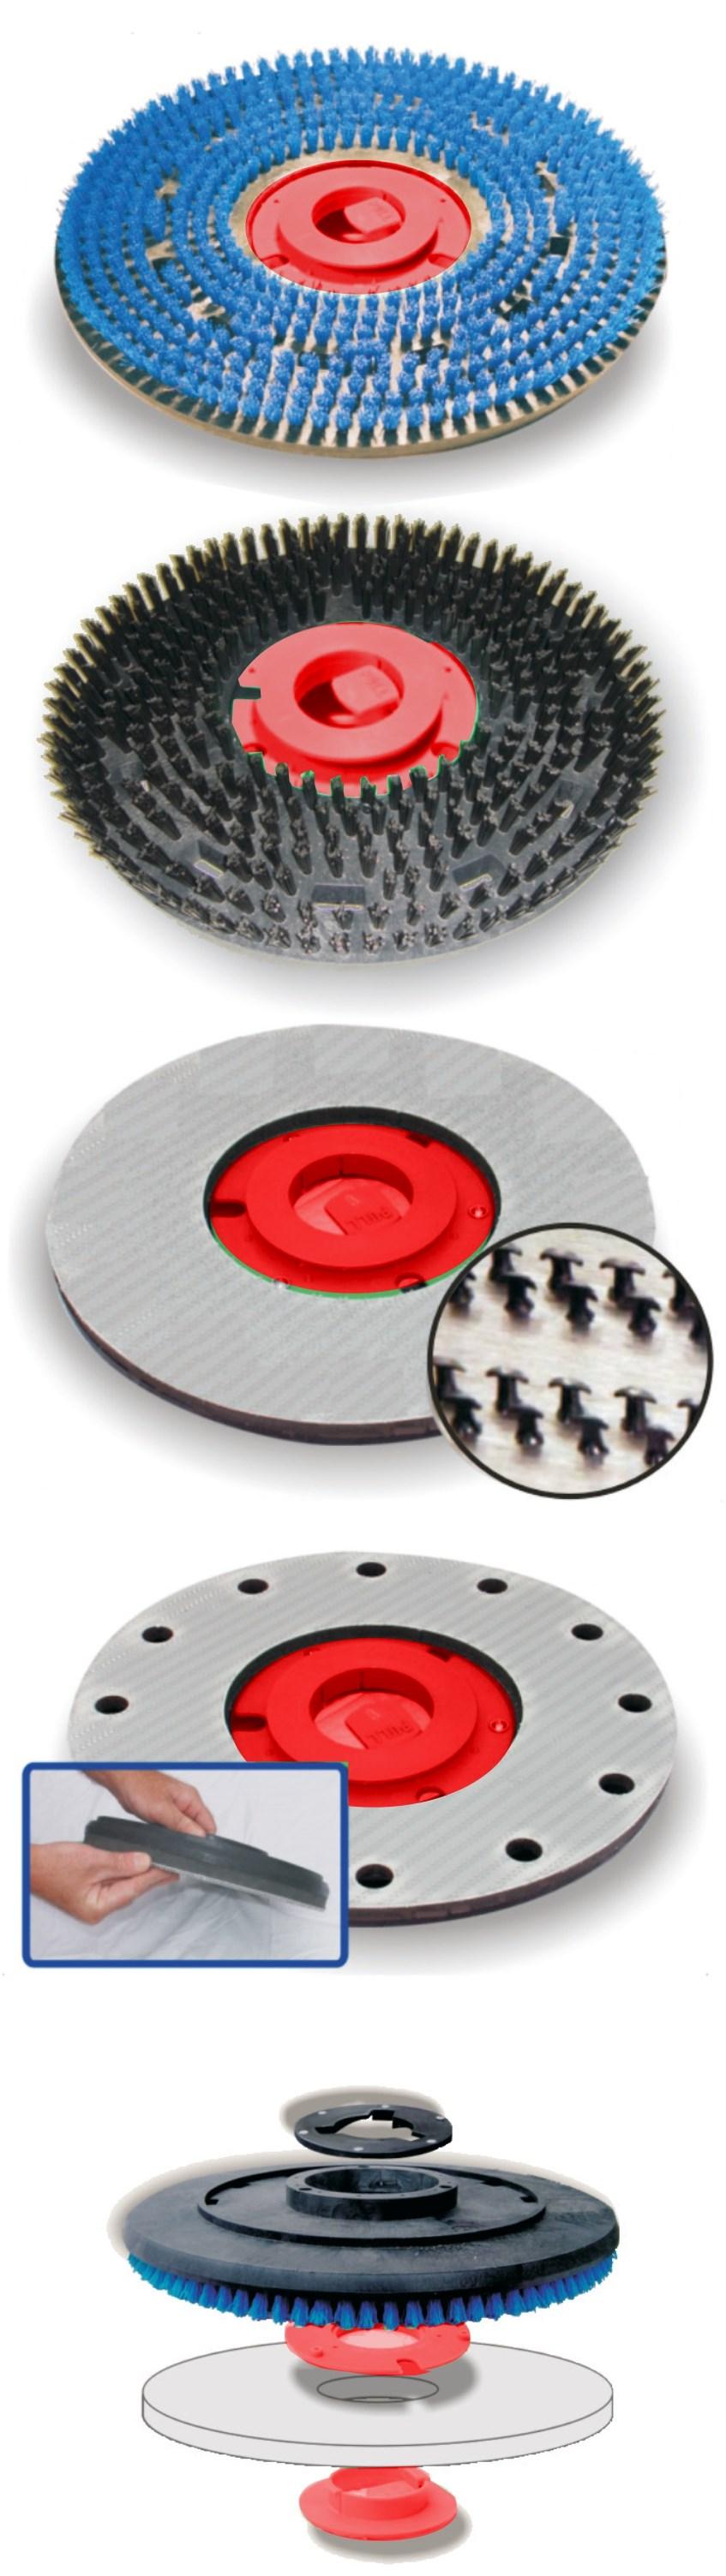 ROTARY PAD DRIVERS If you prefer to maintain floors with rotary pads, you need a pad driver that is strong, balanced, and reliable.